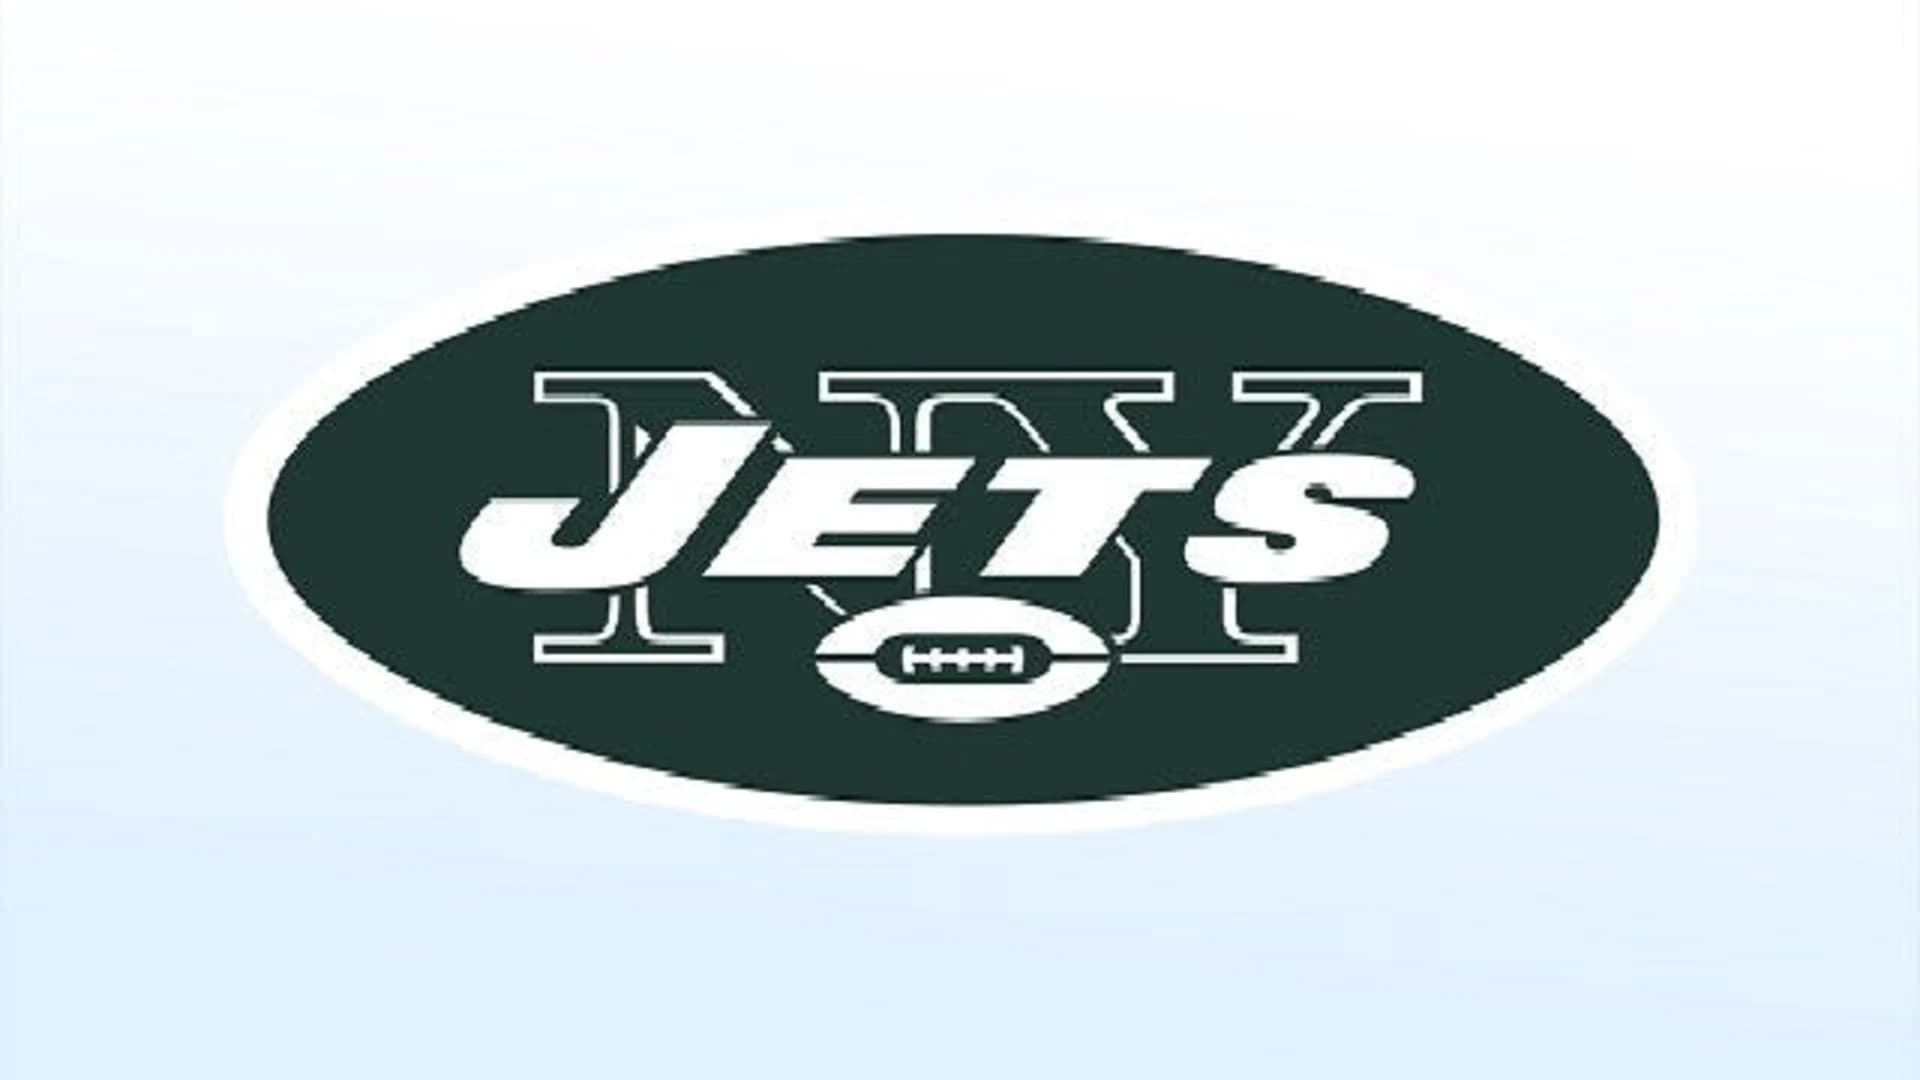 LB Demario Davis headed back to Jets; DB Calvin Pryor traded to Browns